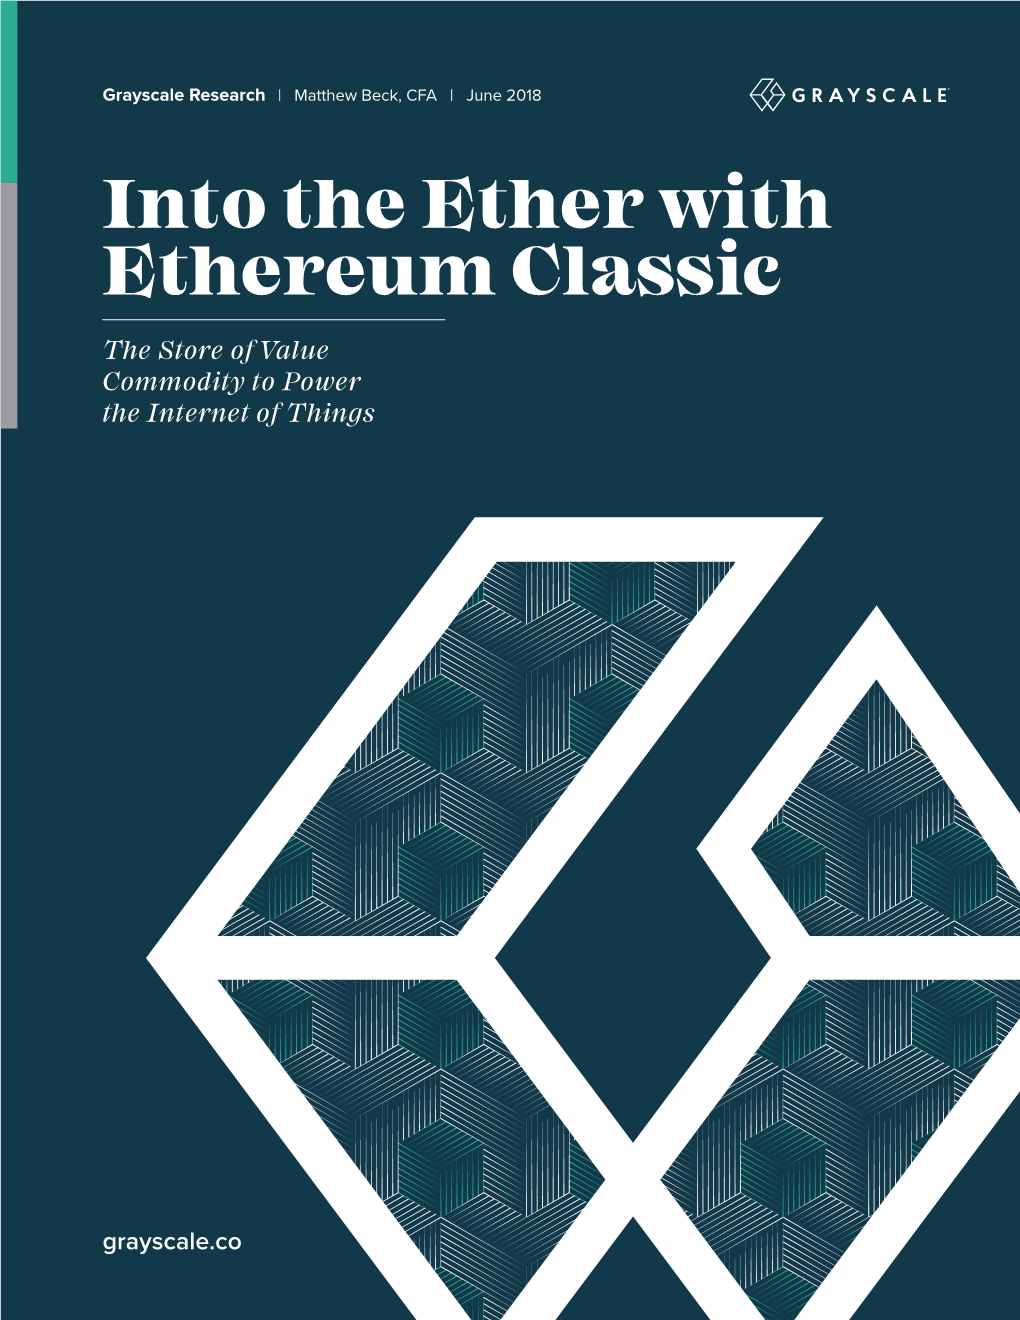 Into the Ether with Ethereum Classic